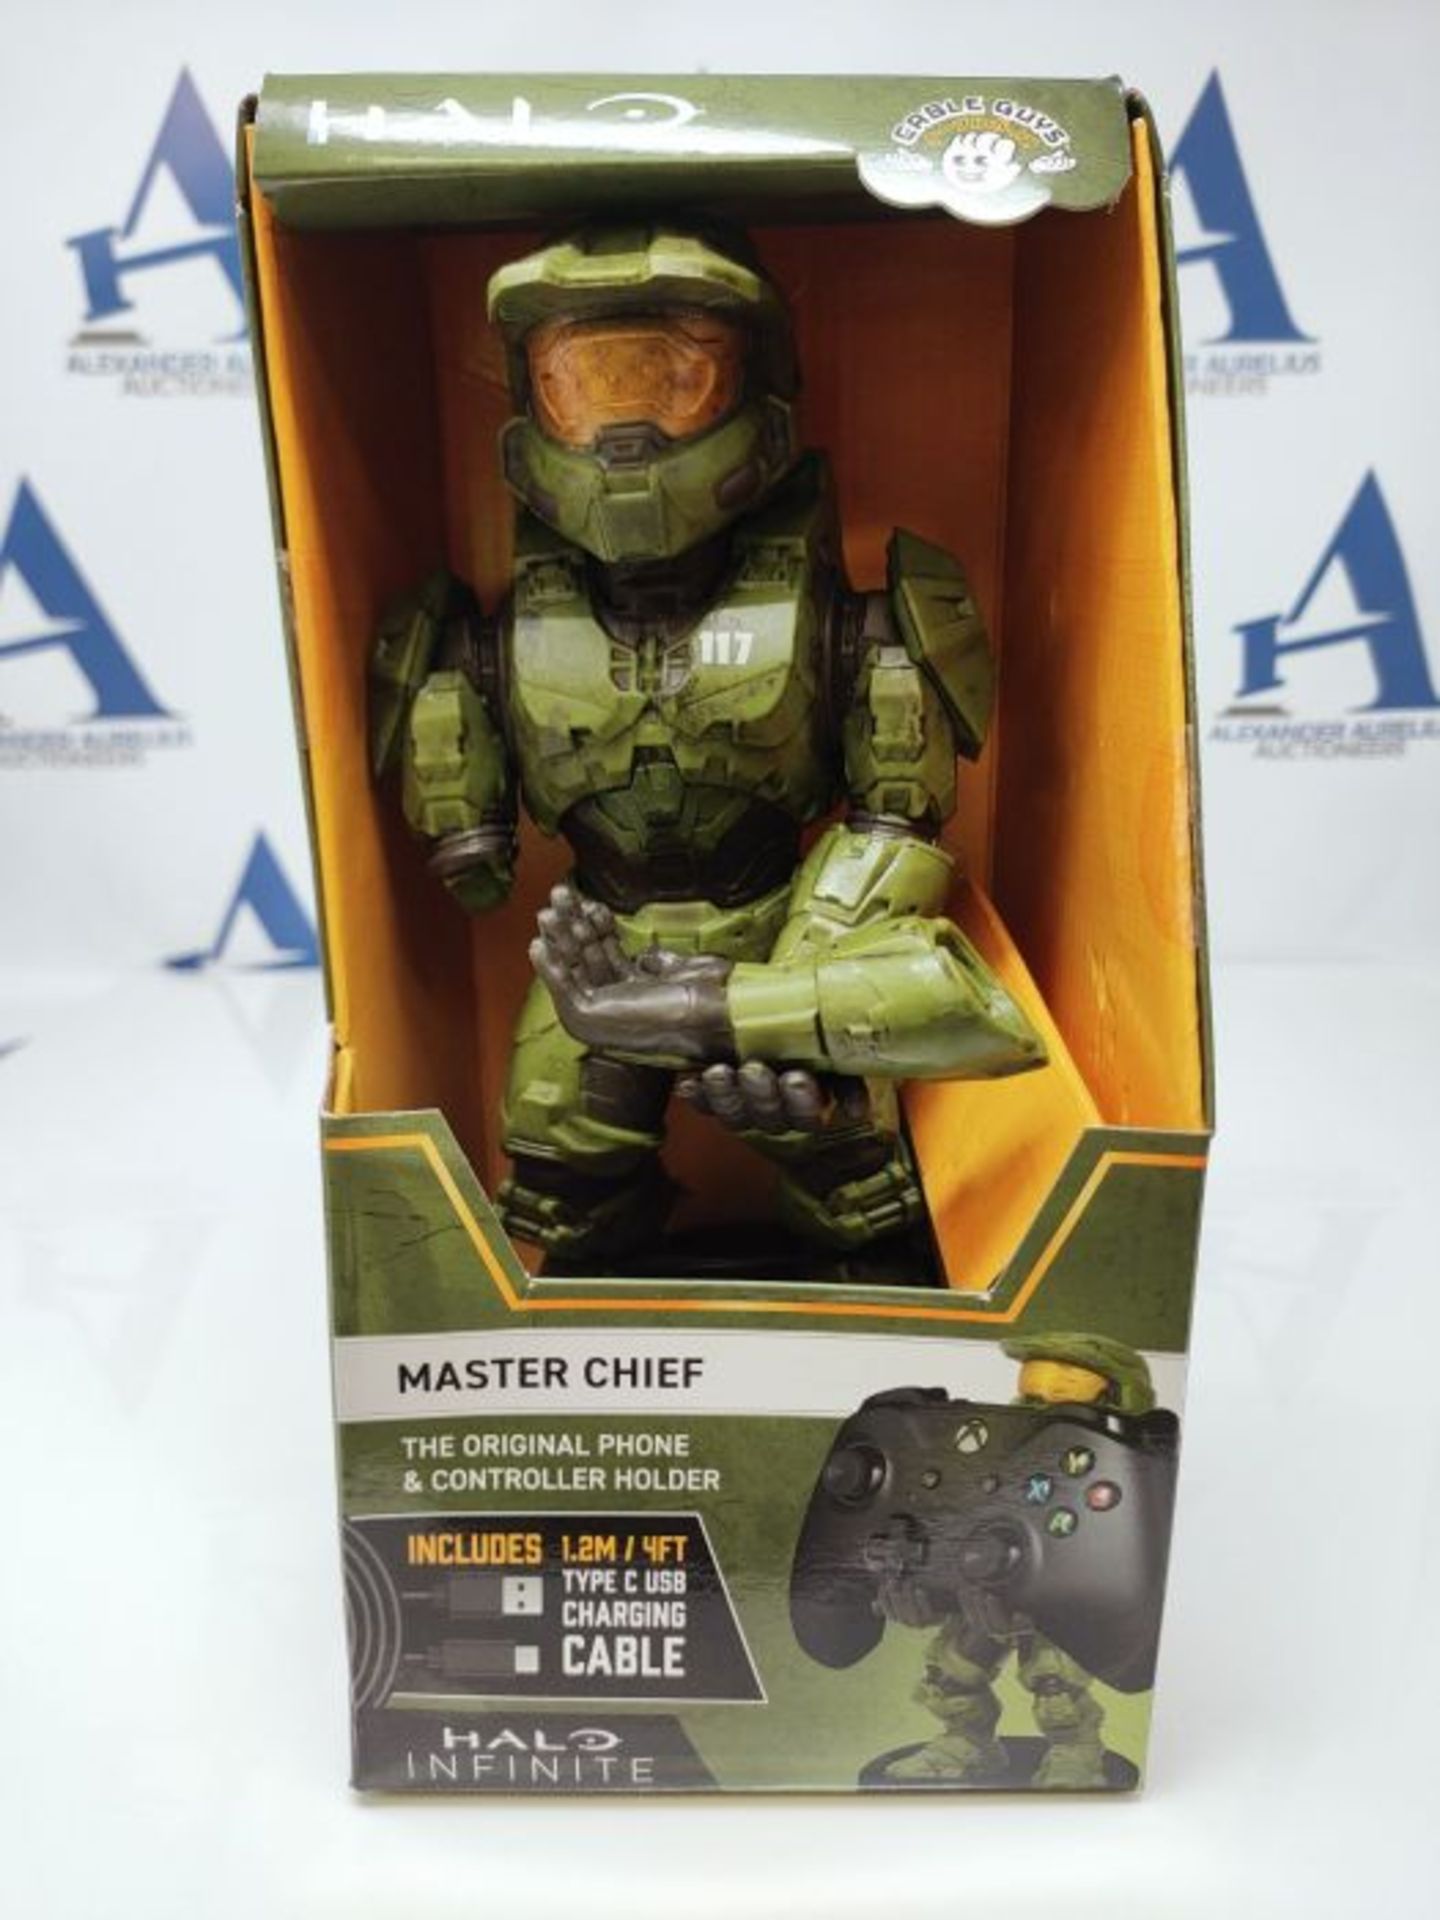 [CRACKED] Exquisite Gaming Halo Infinite - Figurine Cable Guy Master Chief 20 cm CGCRH - Image 2 of 3